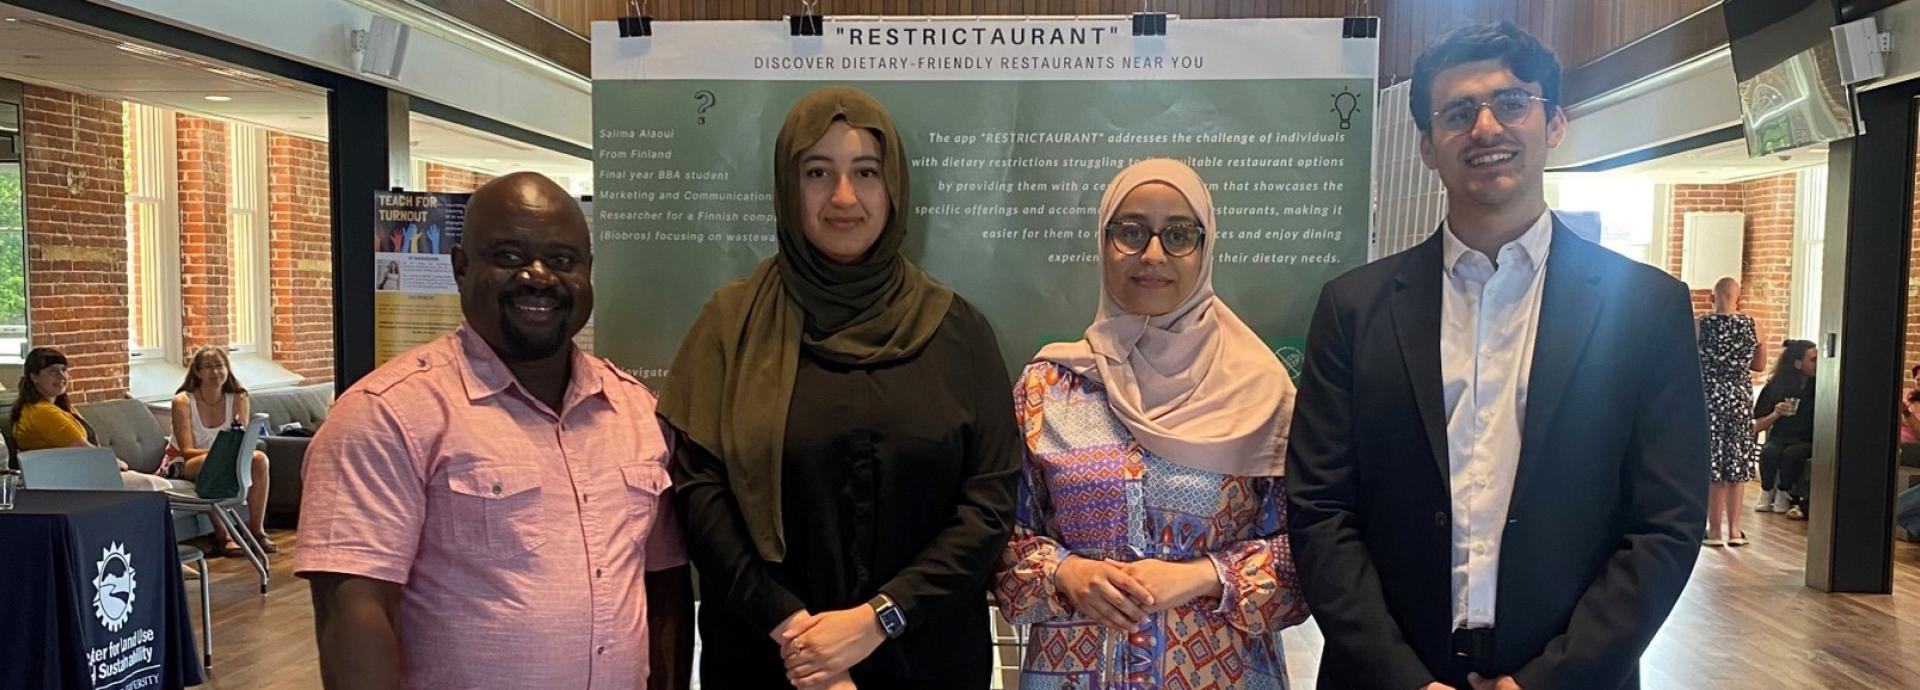 Salima Alaoui with three of her peers posing for a photograph. The group is at a restaurant.